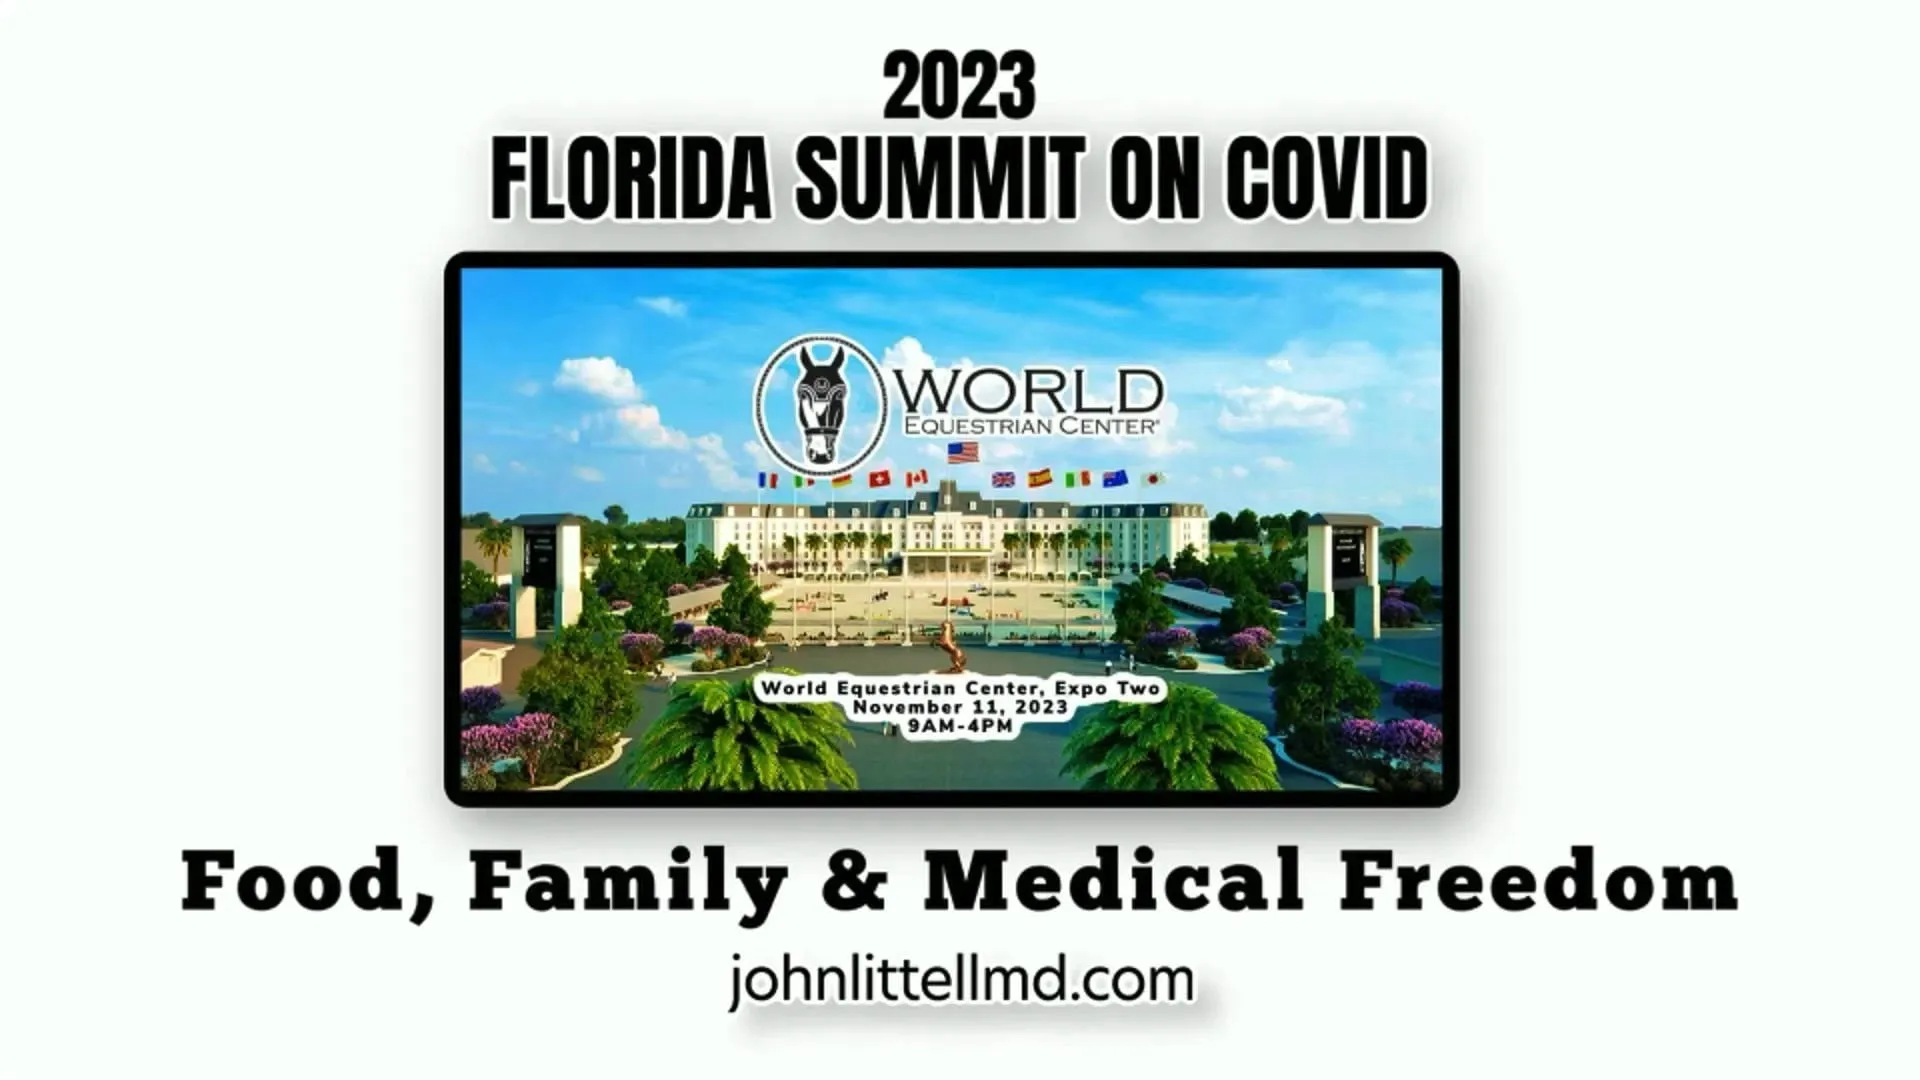 2023 Food, Family, & Medical Freedom summit event flyer